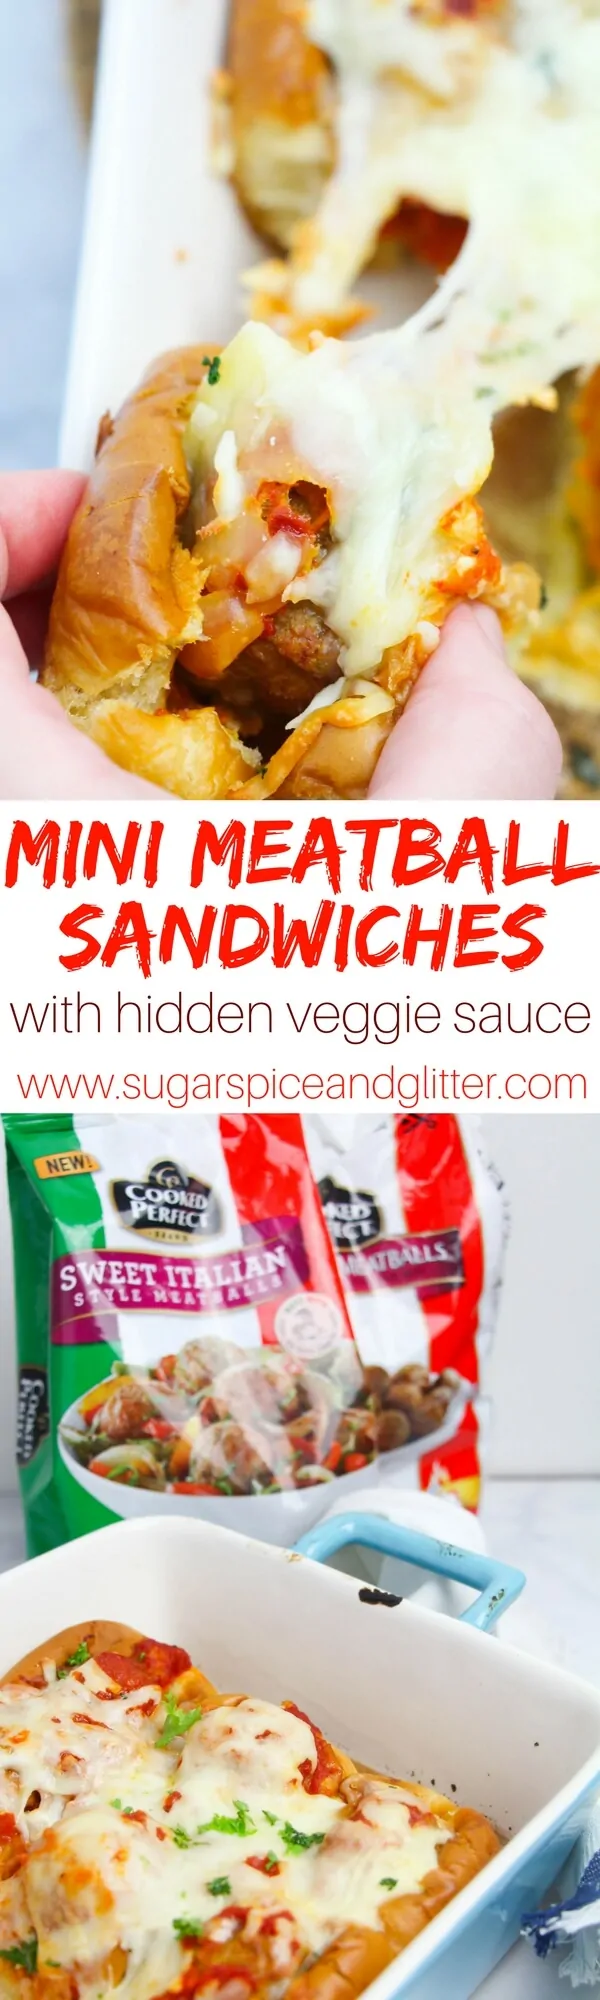 Pull-Apart Mini Meatball Sandwiches with hidden veggie sauce are a delicious and easy meal your whole family will go crazy for - this is one meatball recipe you have to try!